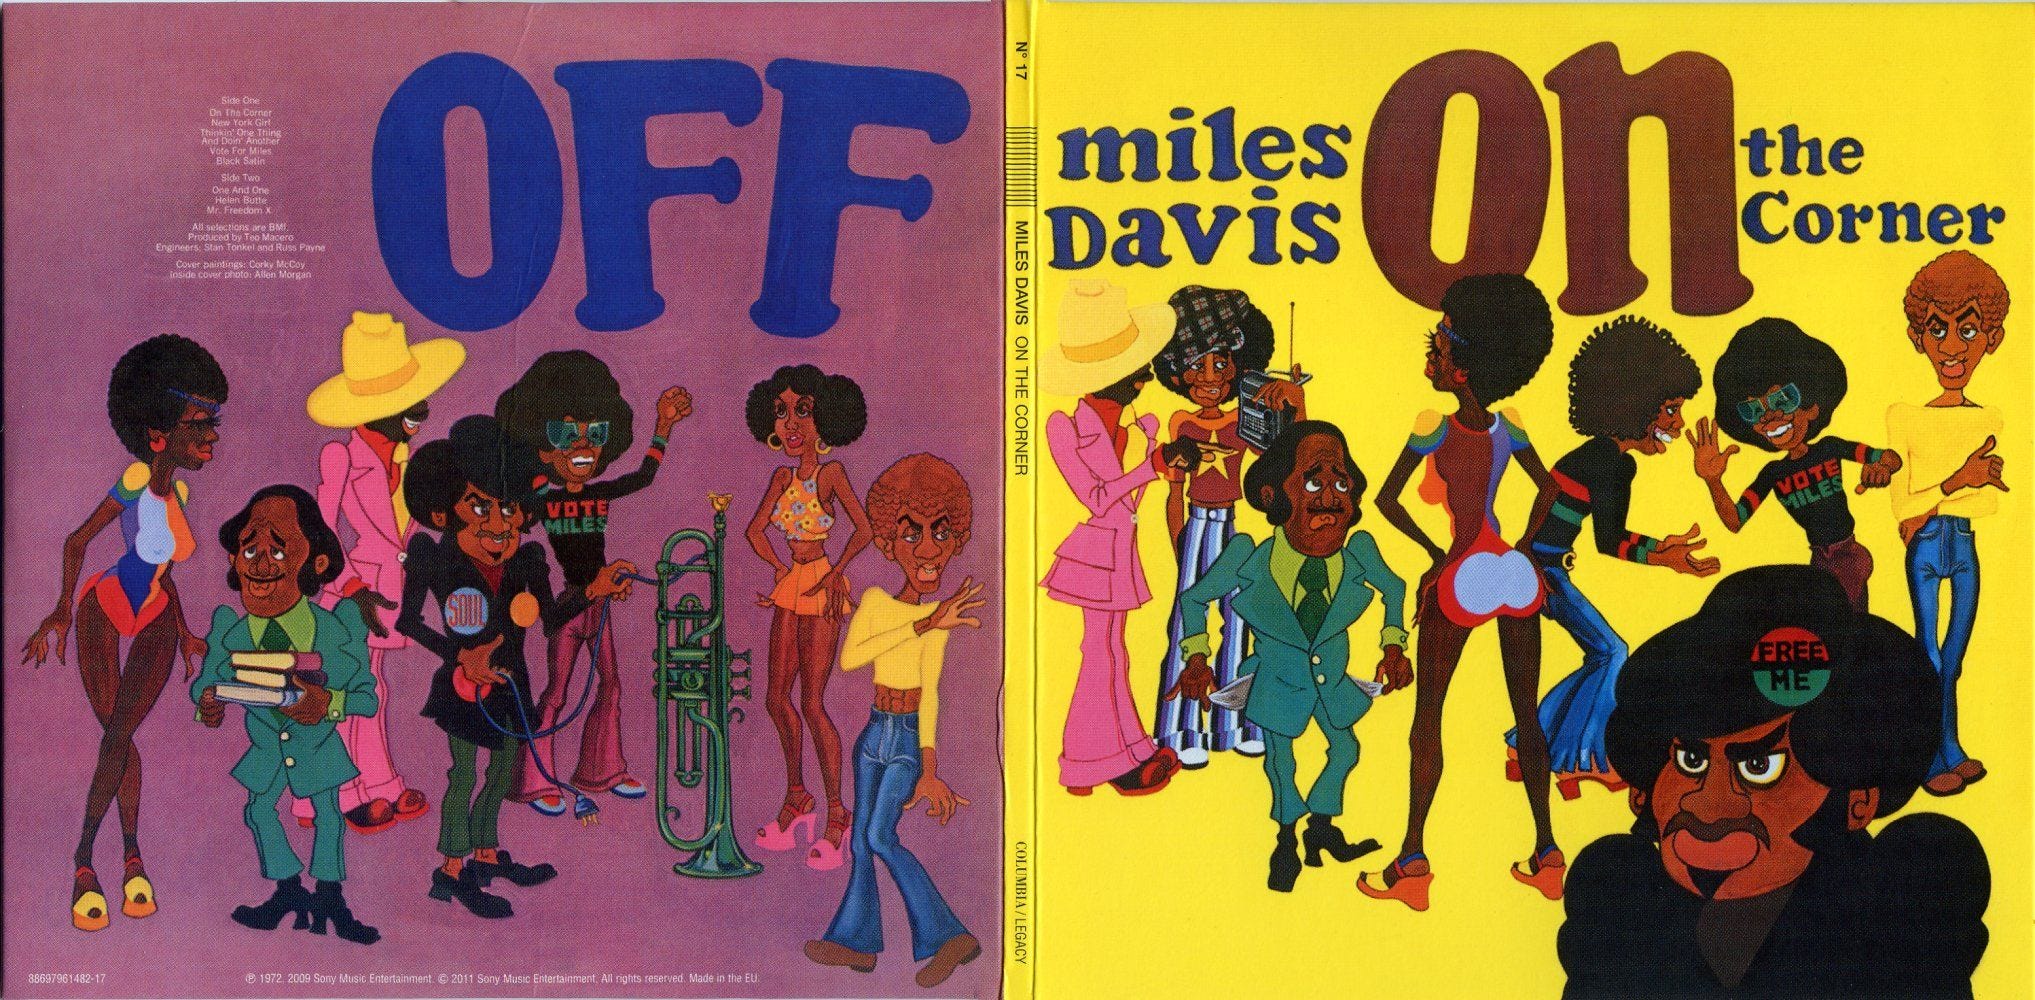 Miles Davis: On the Corner Fifty-one years later